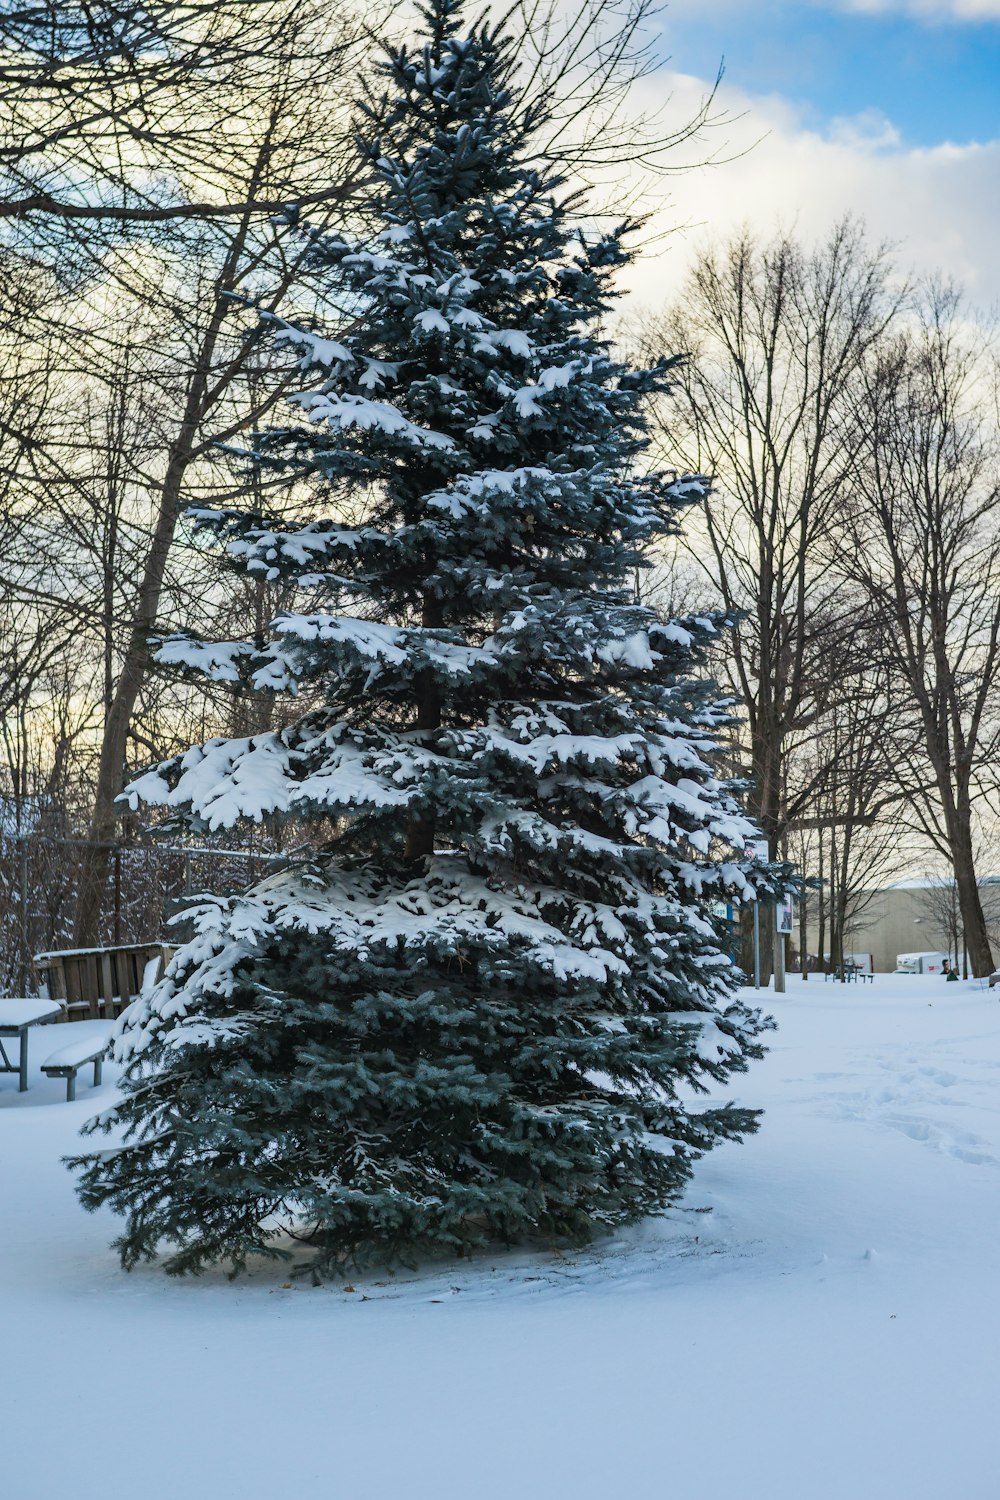 a snow covered pine tree in a park